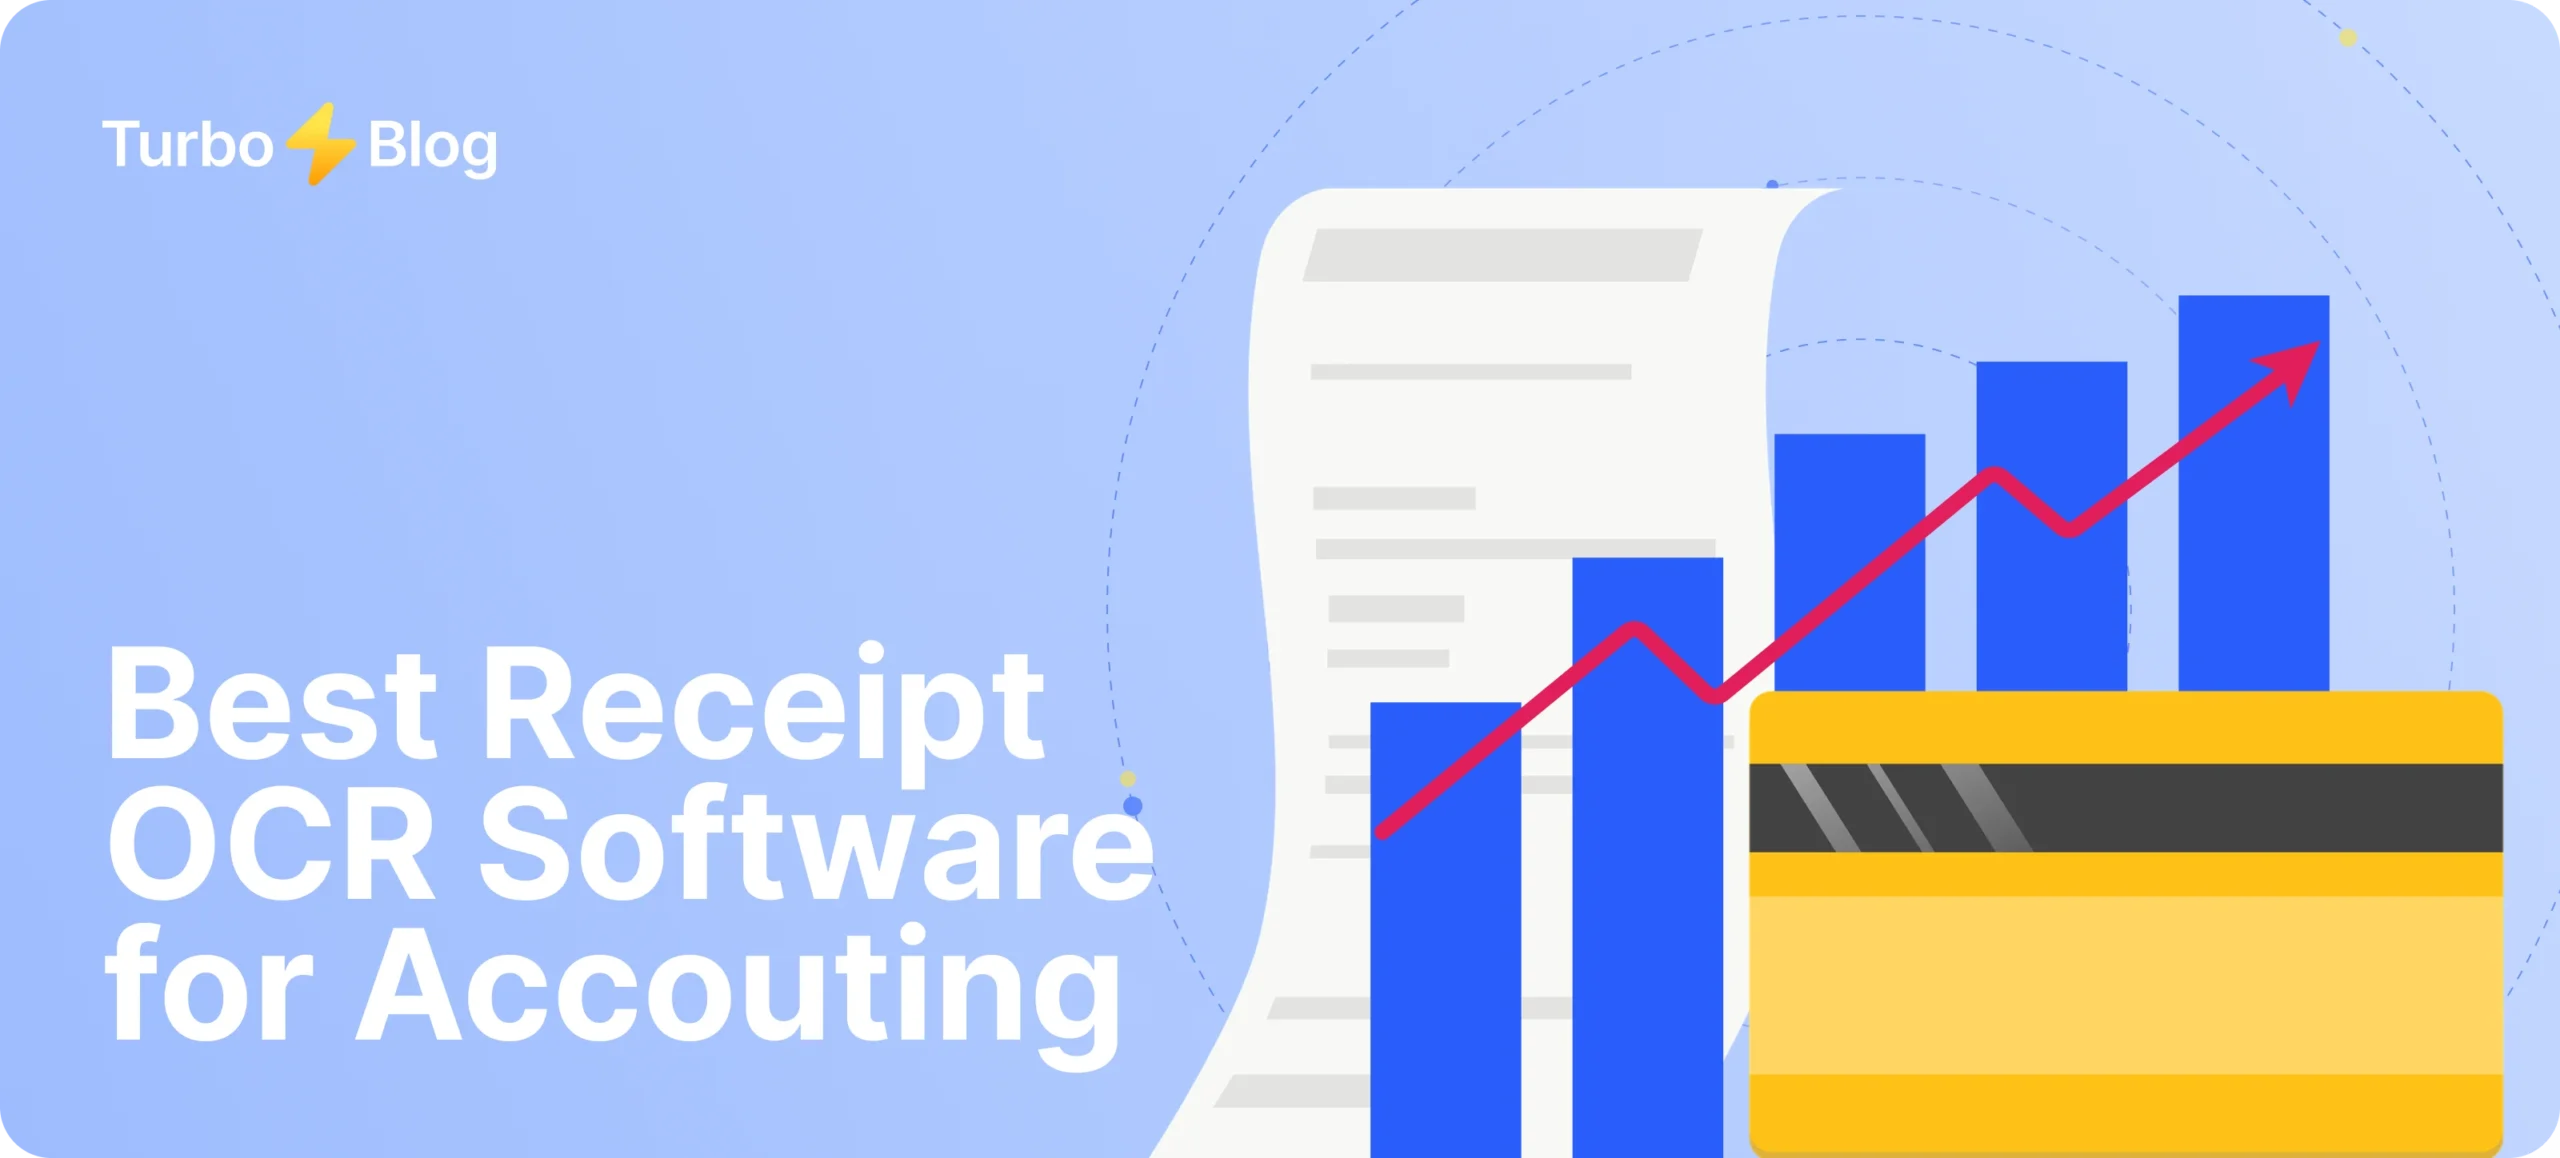 5 Best Receipt OCR Software for accounting